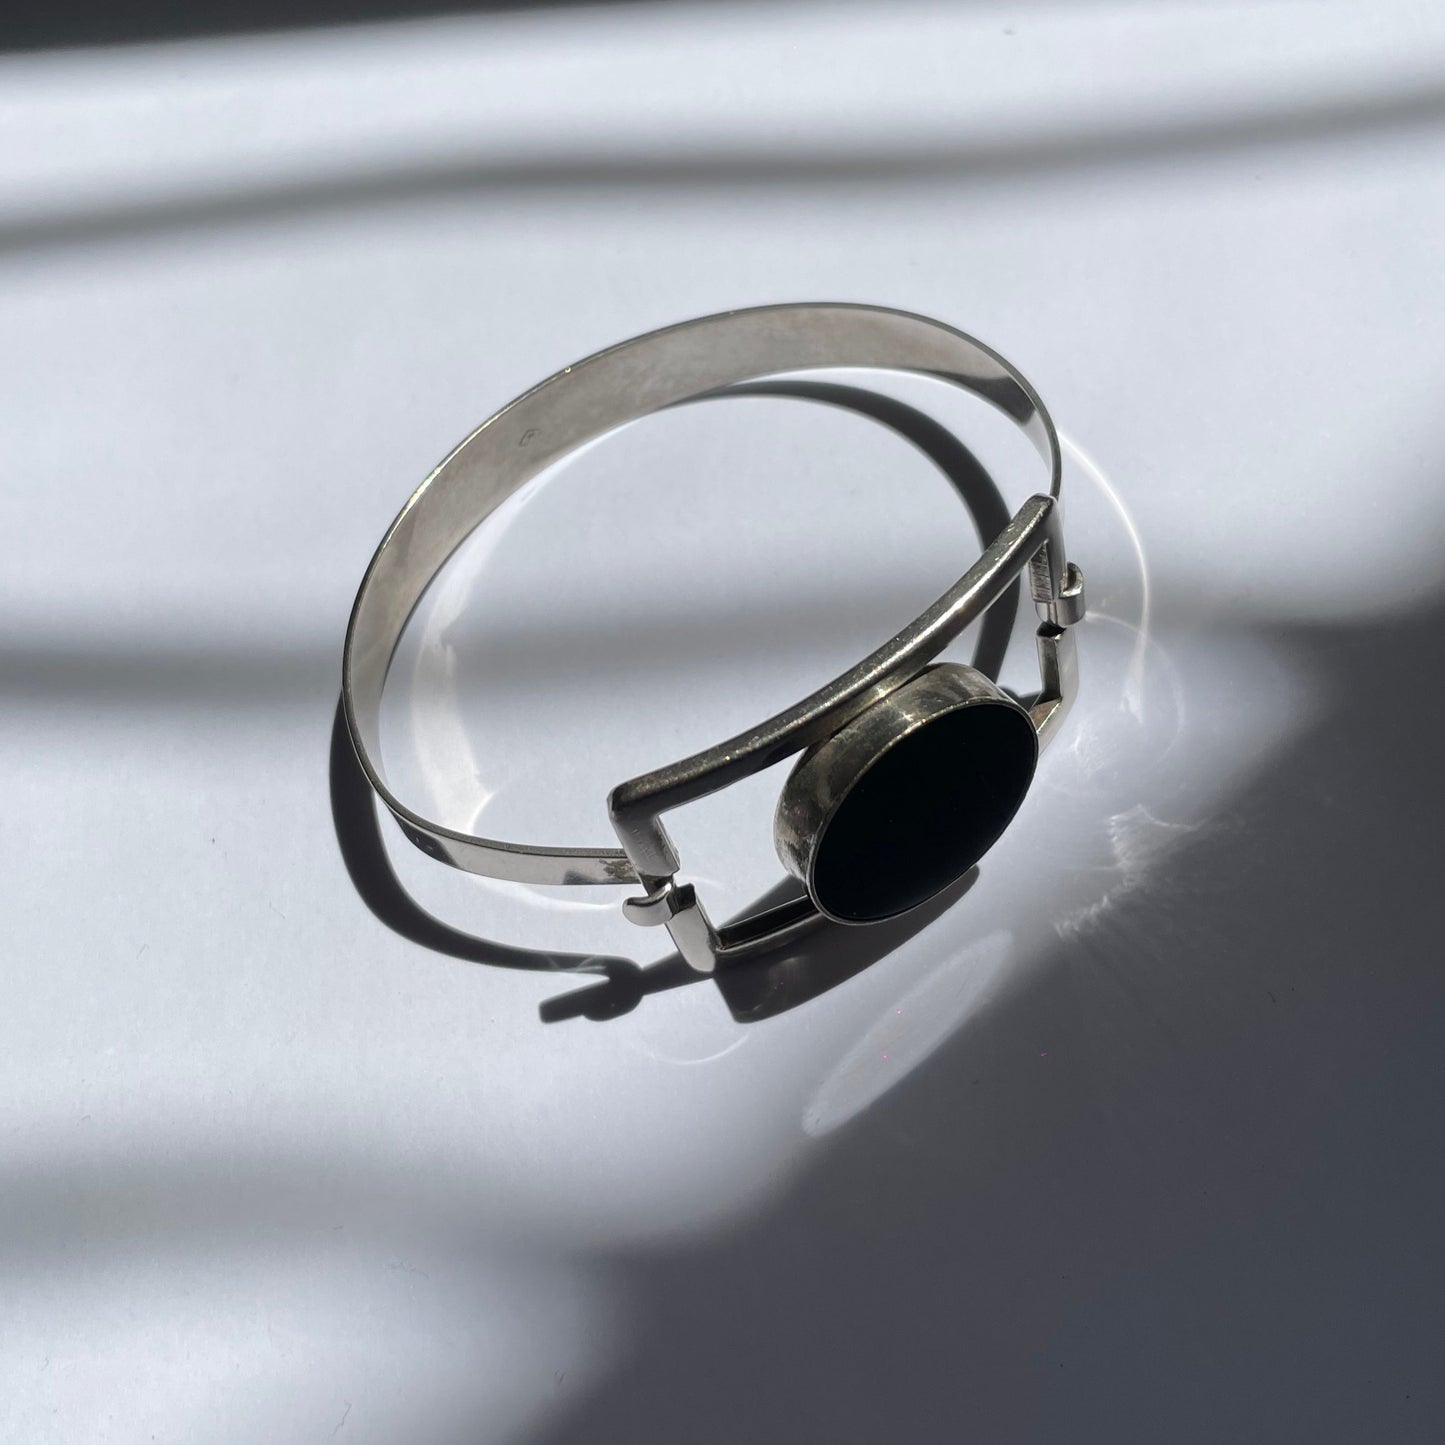 Vintage modernist 80s stainless steel bangle with black stone